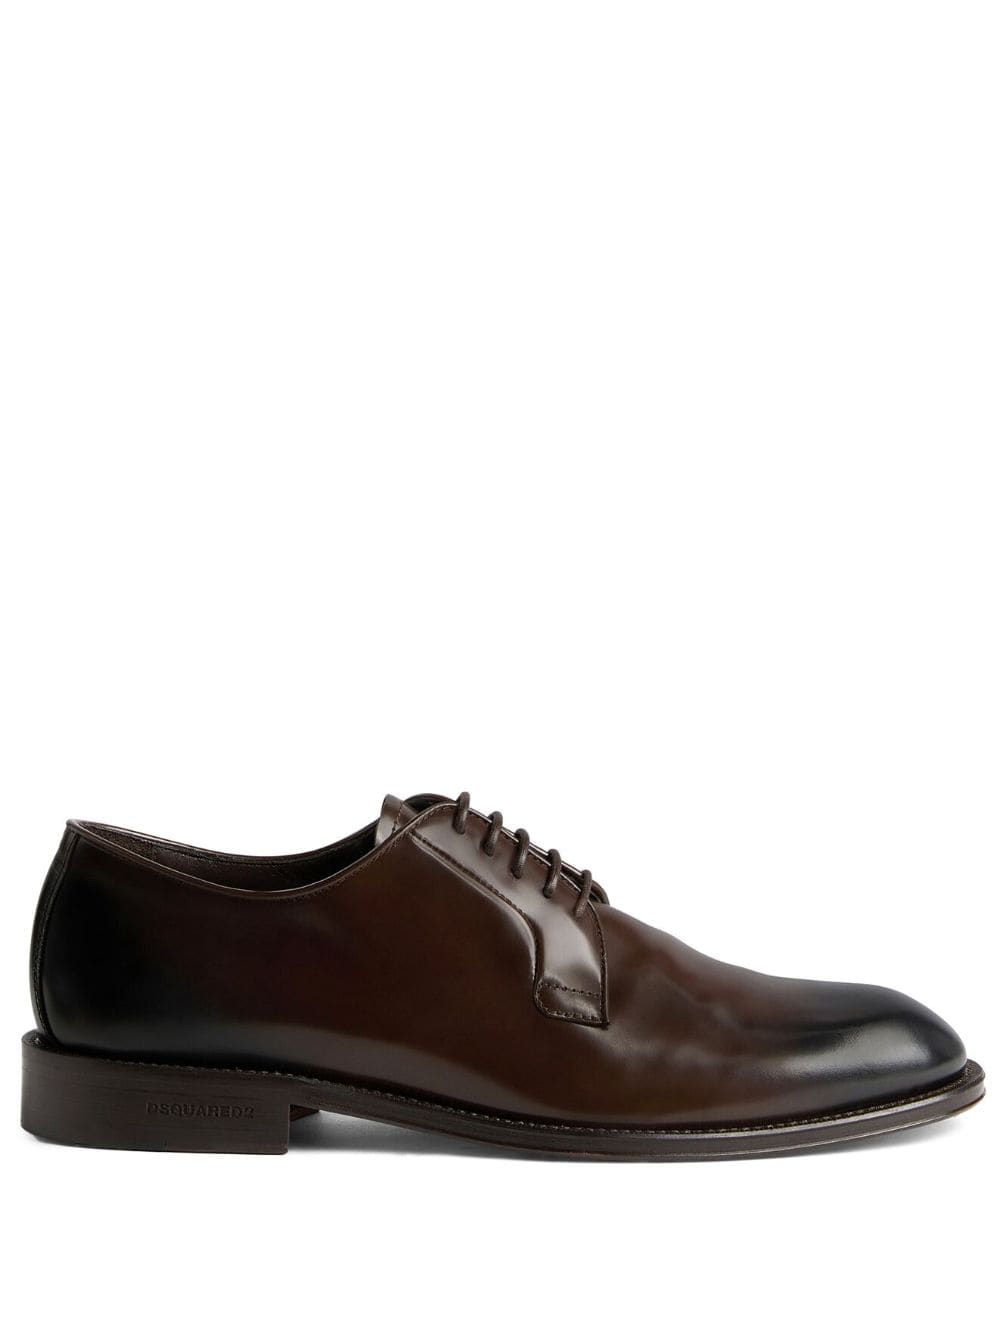 Dsquared2 patent leather derby shoes - Bruin